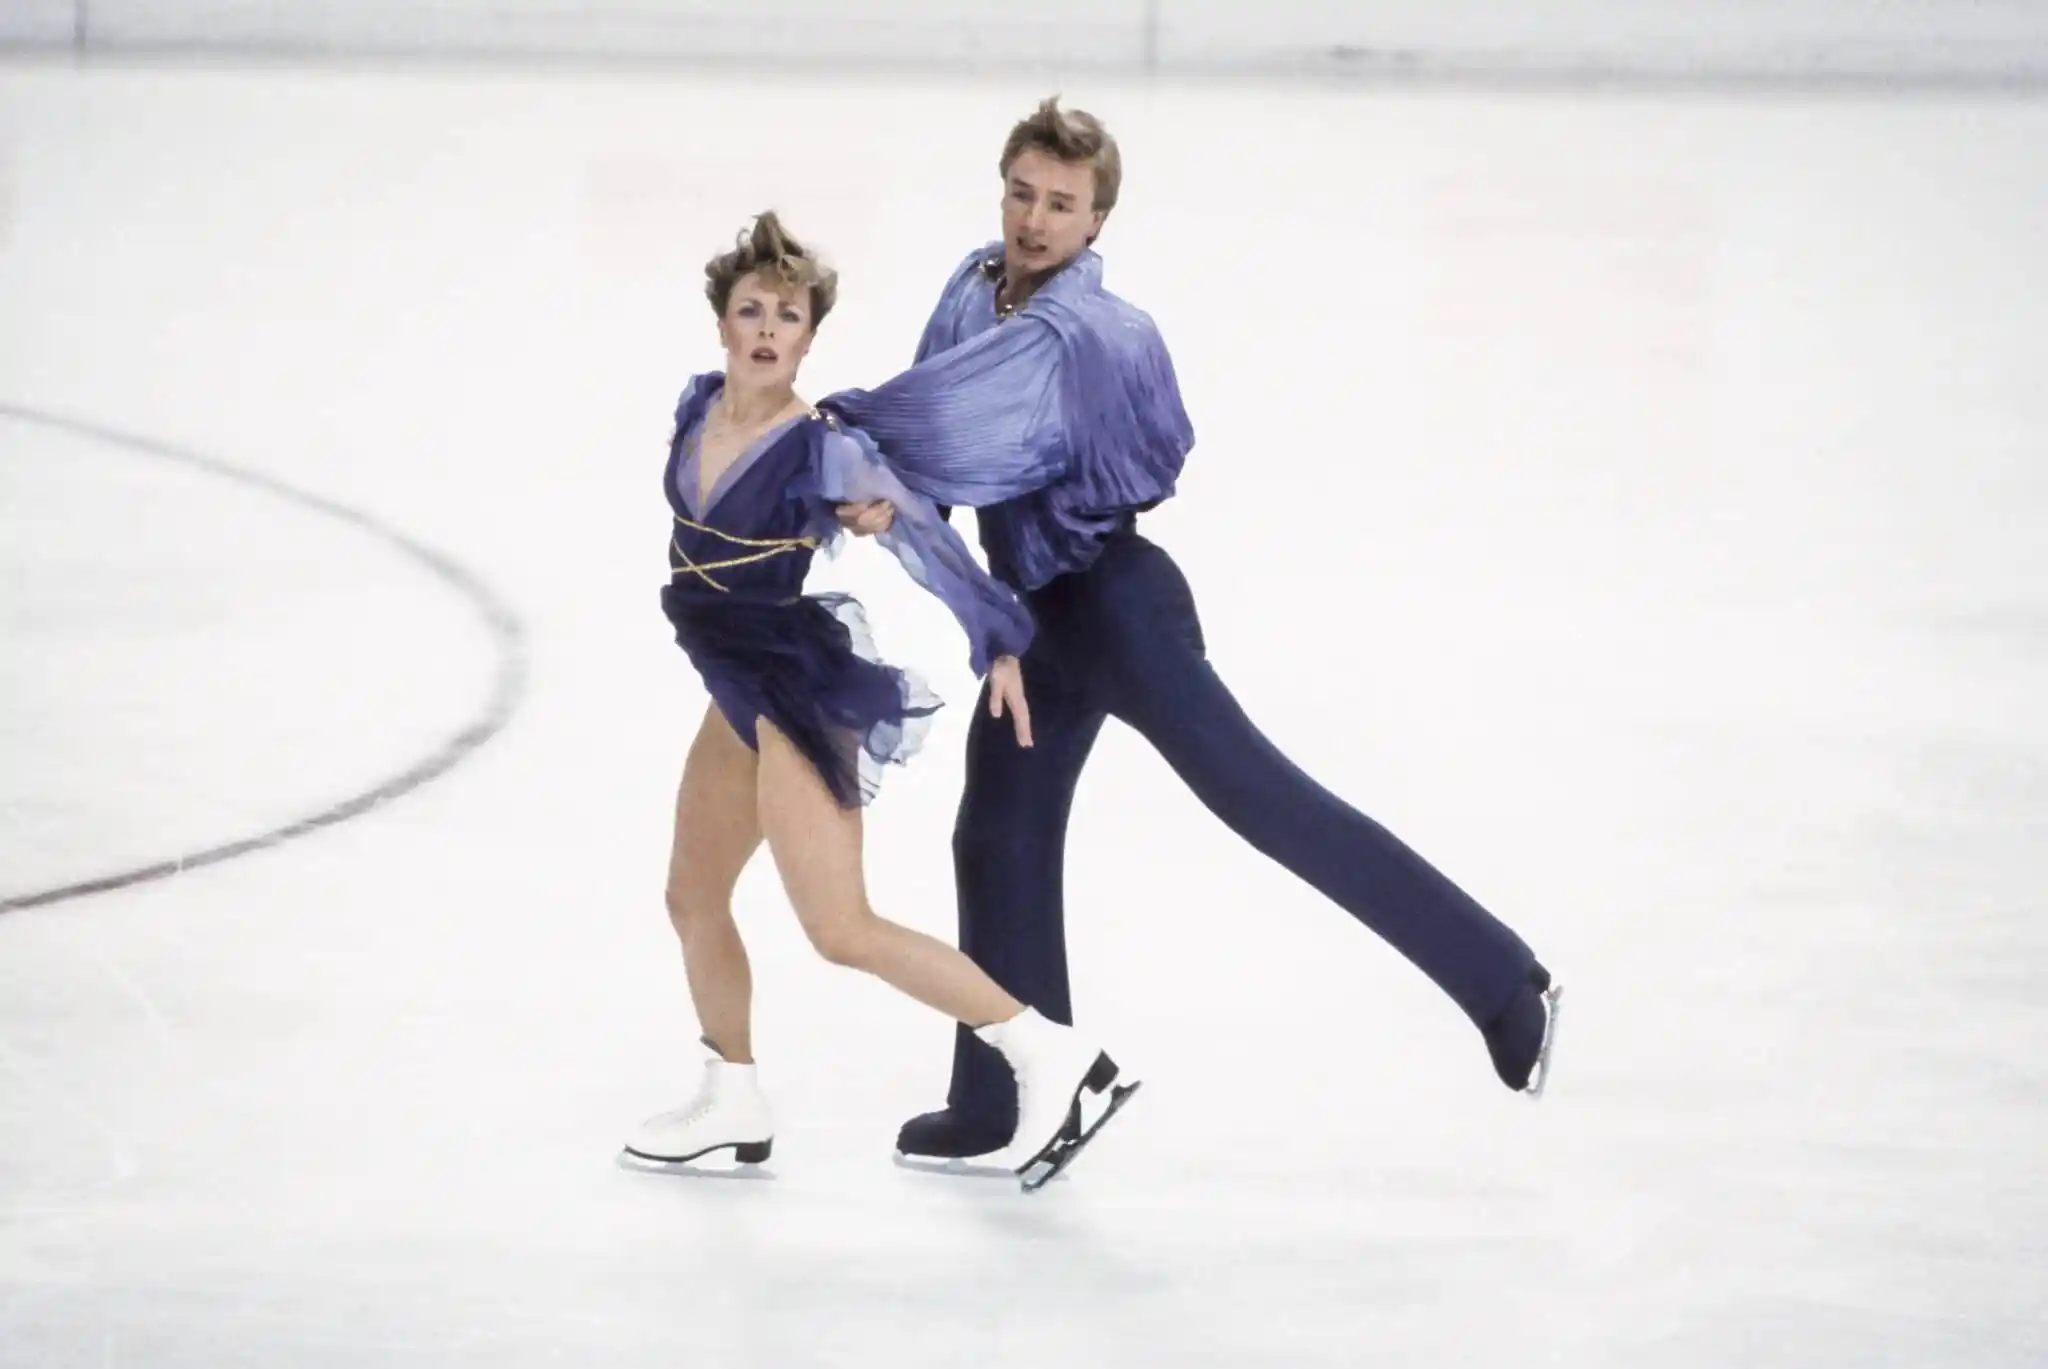 Jayne Torvill and Christopher Dean compete in the Ice Dancing competition at the 1984 Winter Olympics in Sarajevo